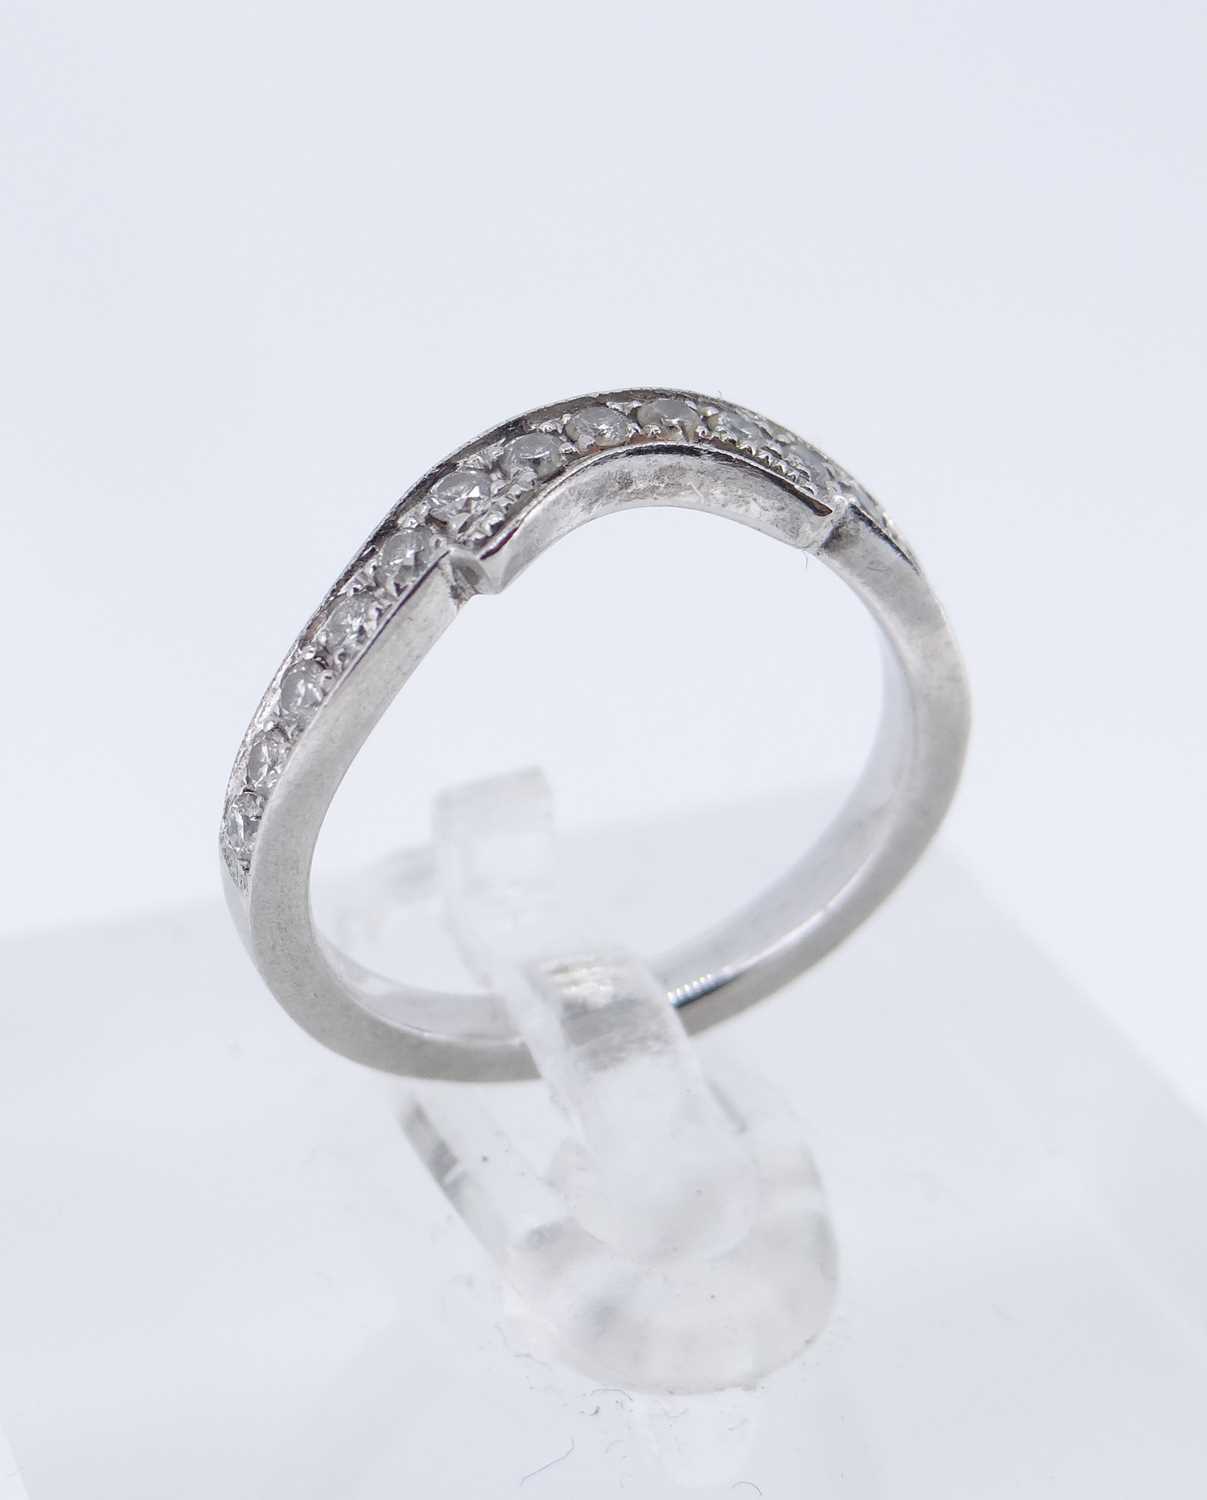 MODERN PLATINUM DIAMOND ENCRUSTED ENGAGEMENT RING & MATCHING WEDDING BAND, the central stone - Image 5 of 8